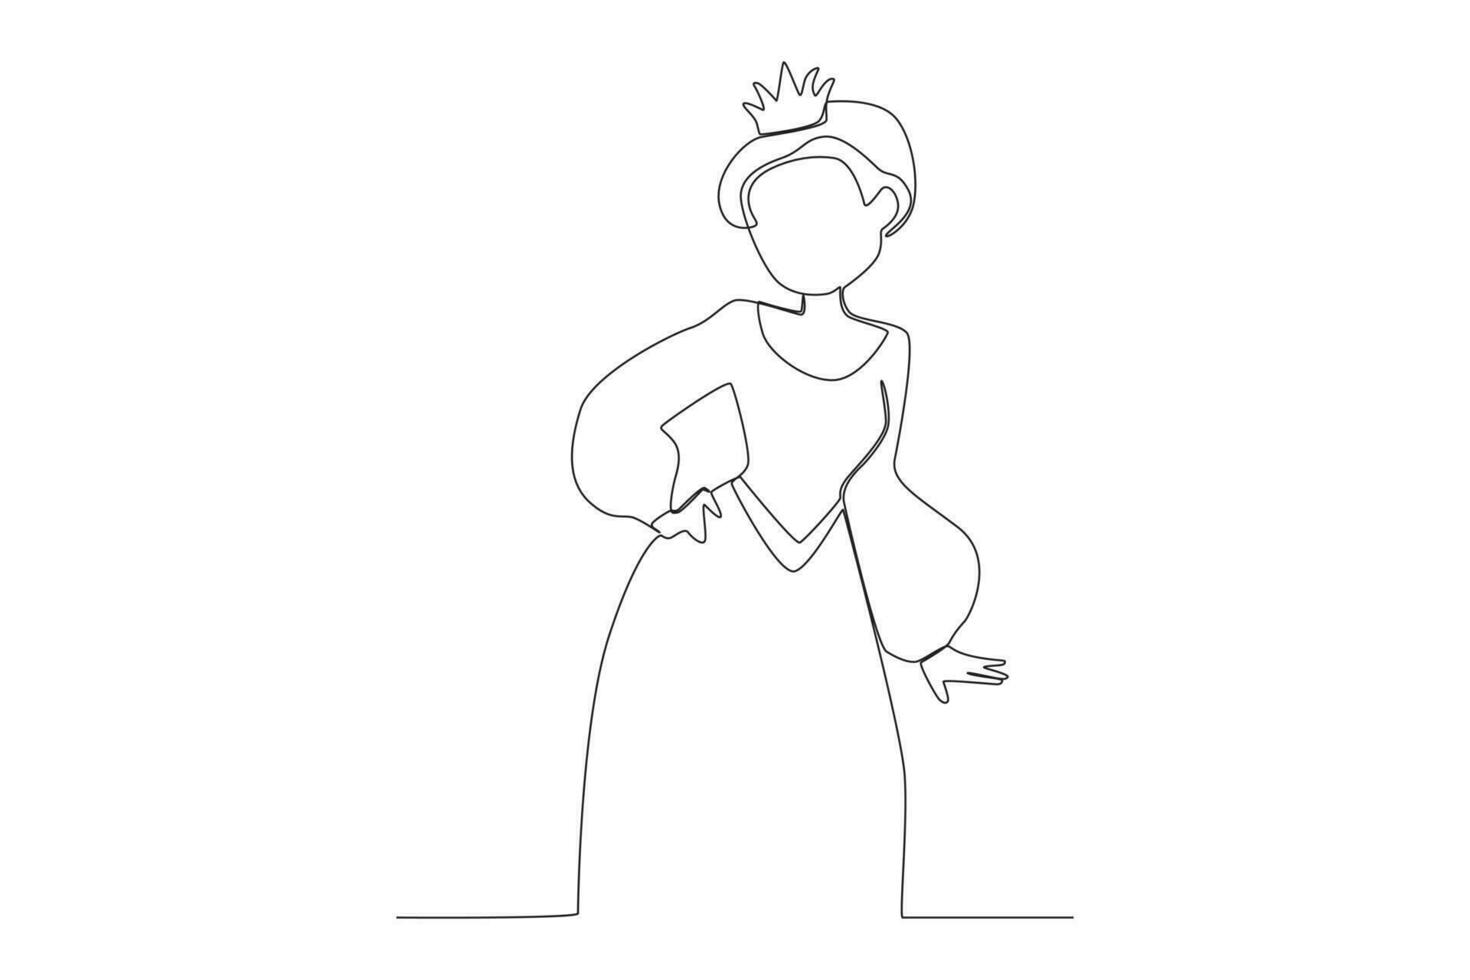 A queen posing for her coronation day vector